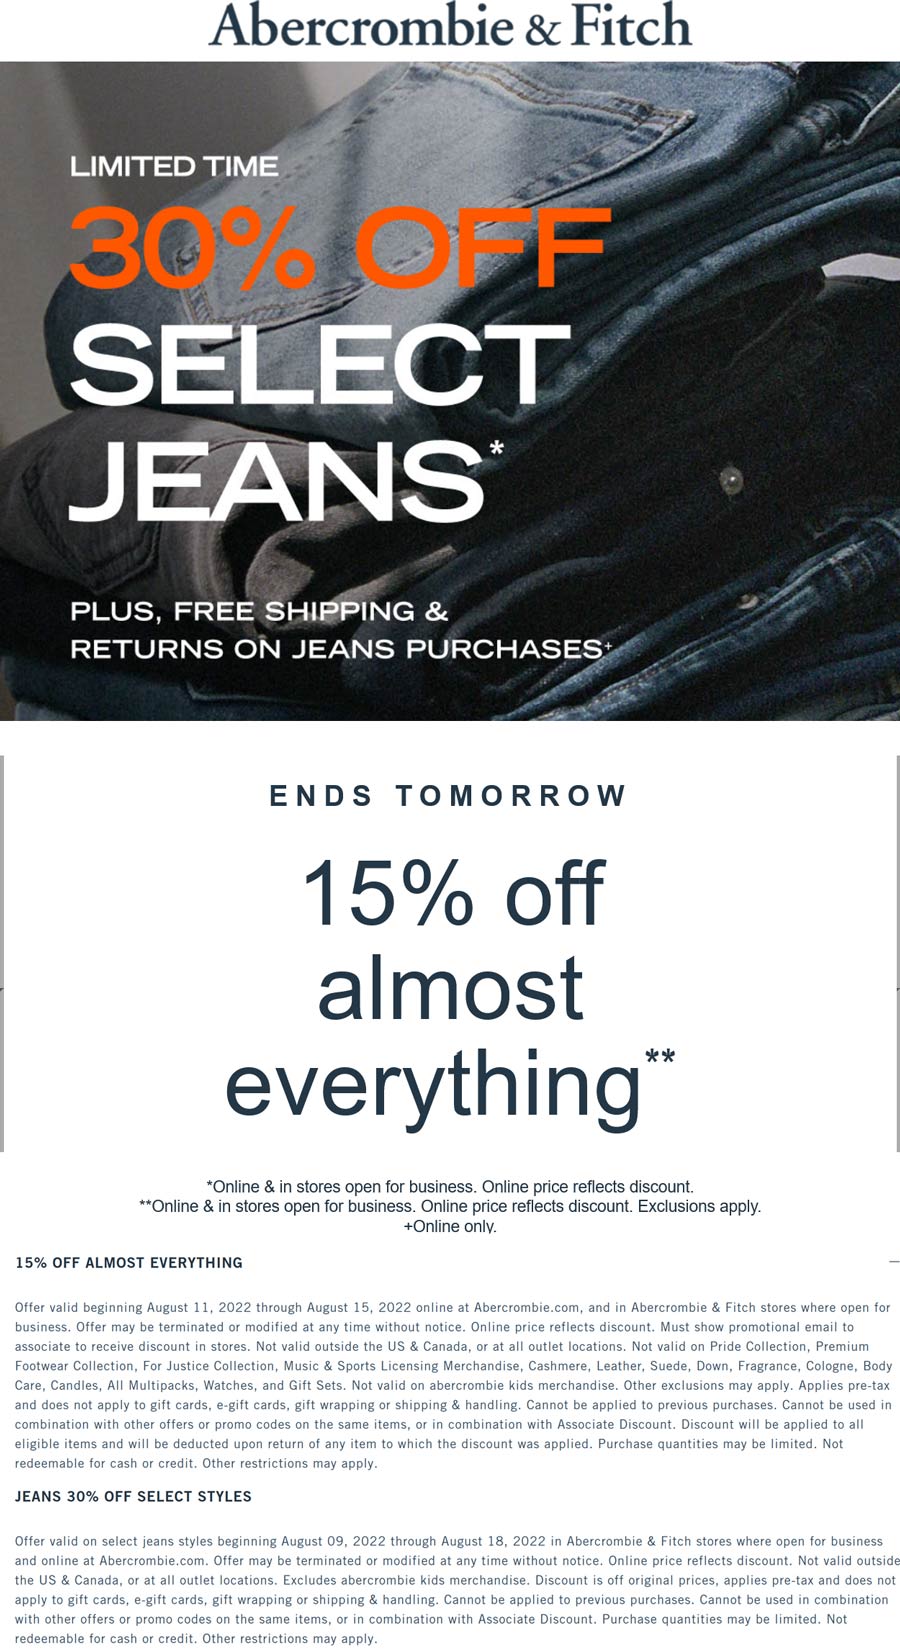 Abercrombie & Fitch coupons & promo code for [November 2022]